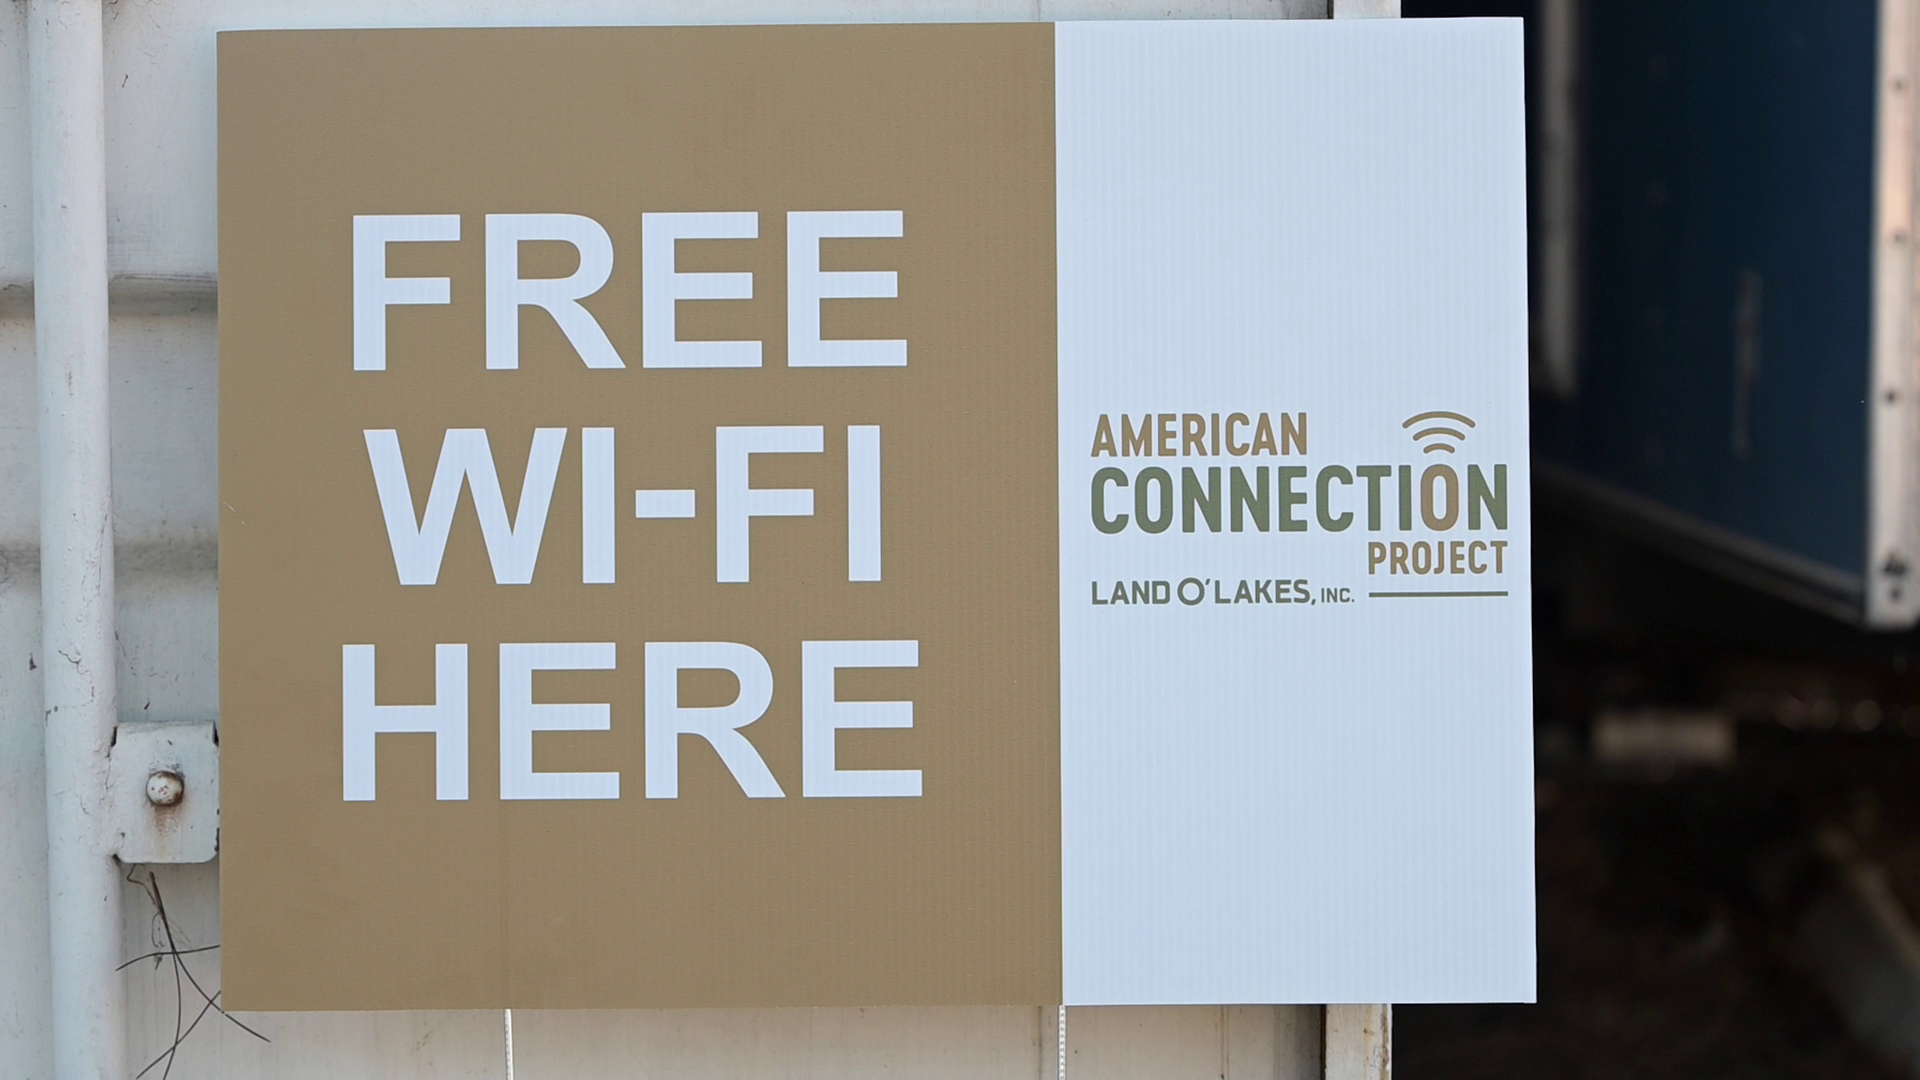 American Connection Project: Free Public Wi-Fi Partners